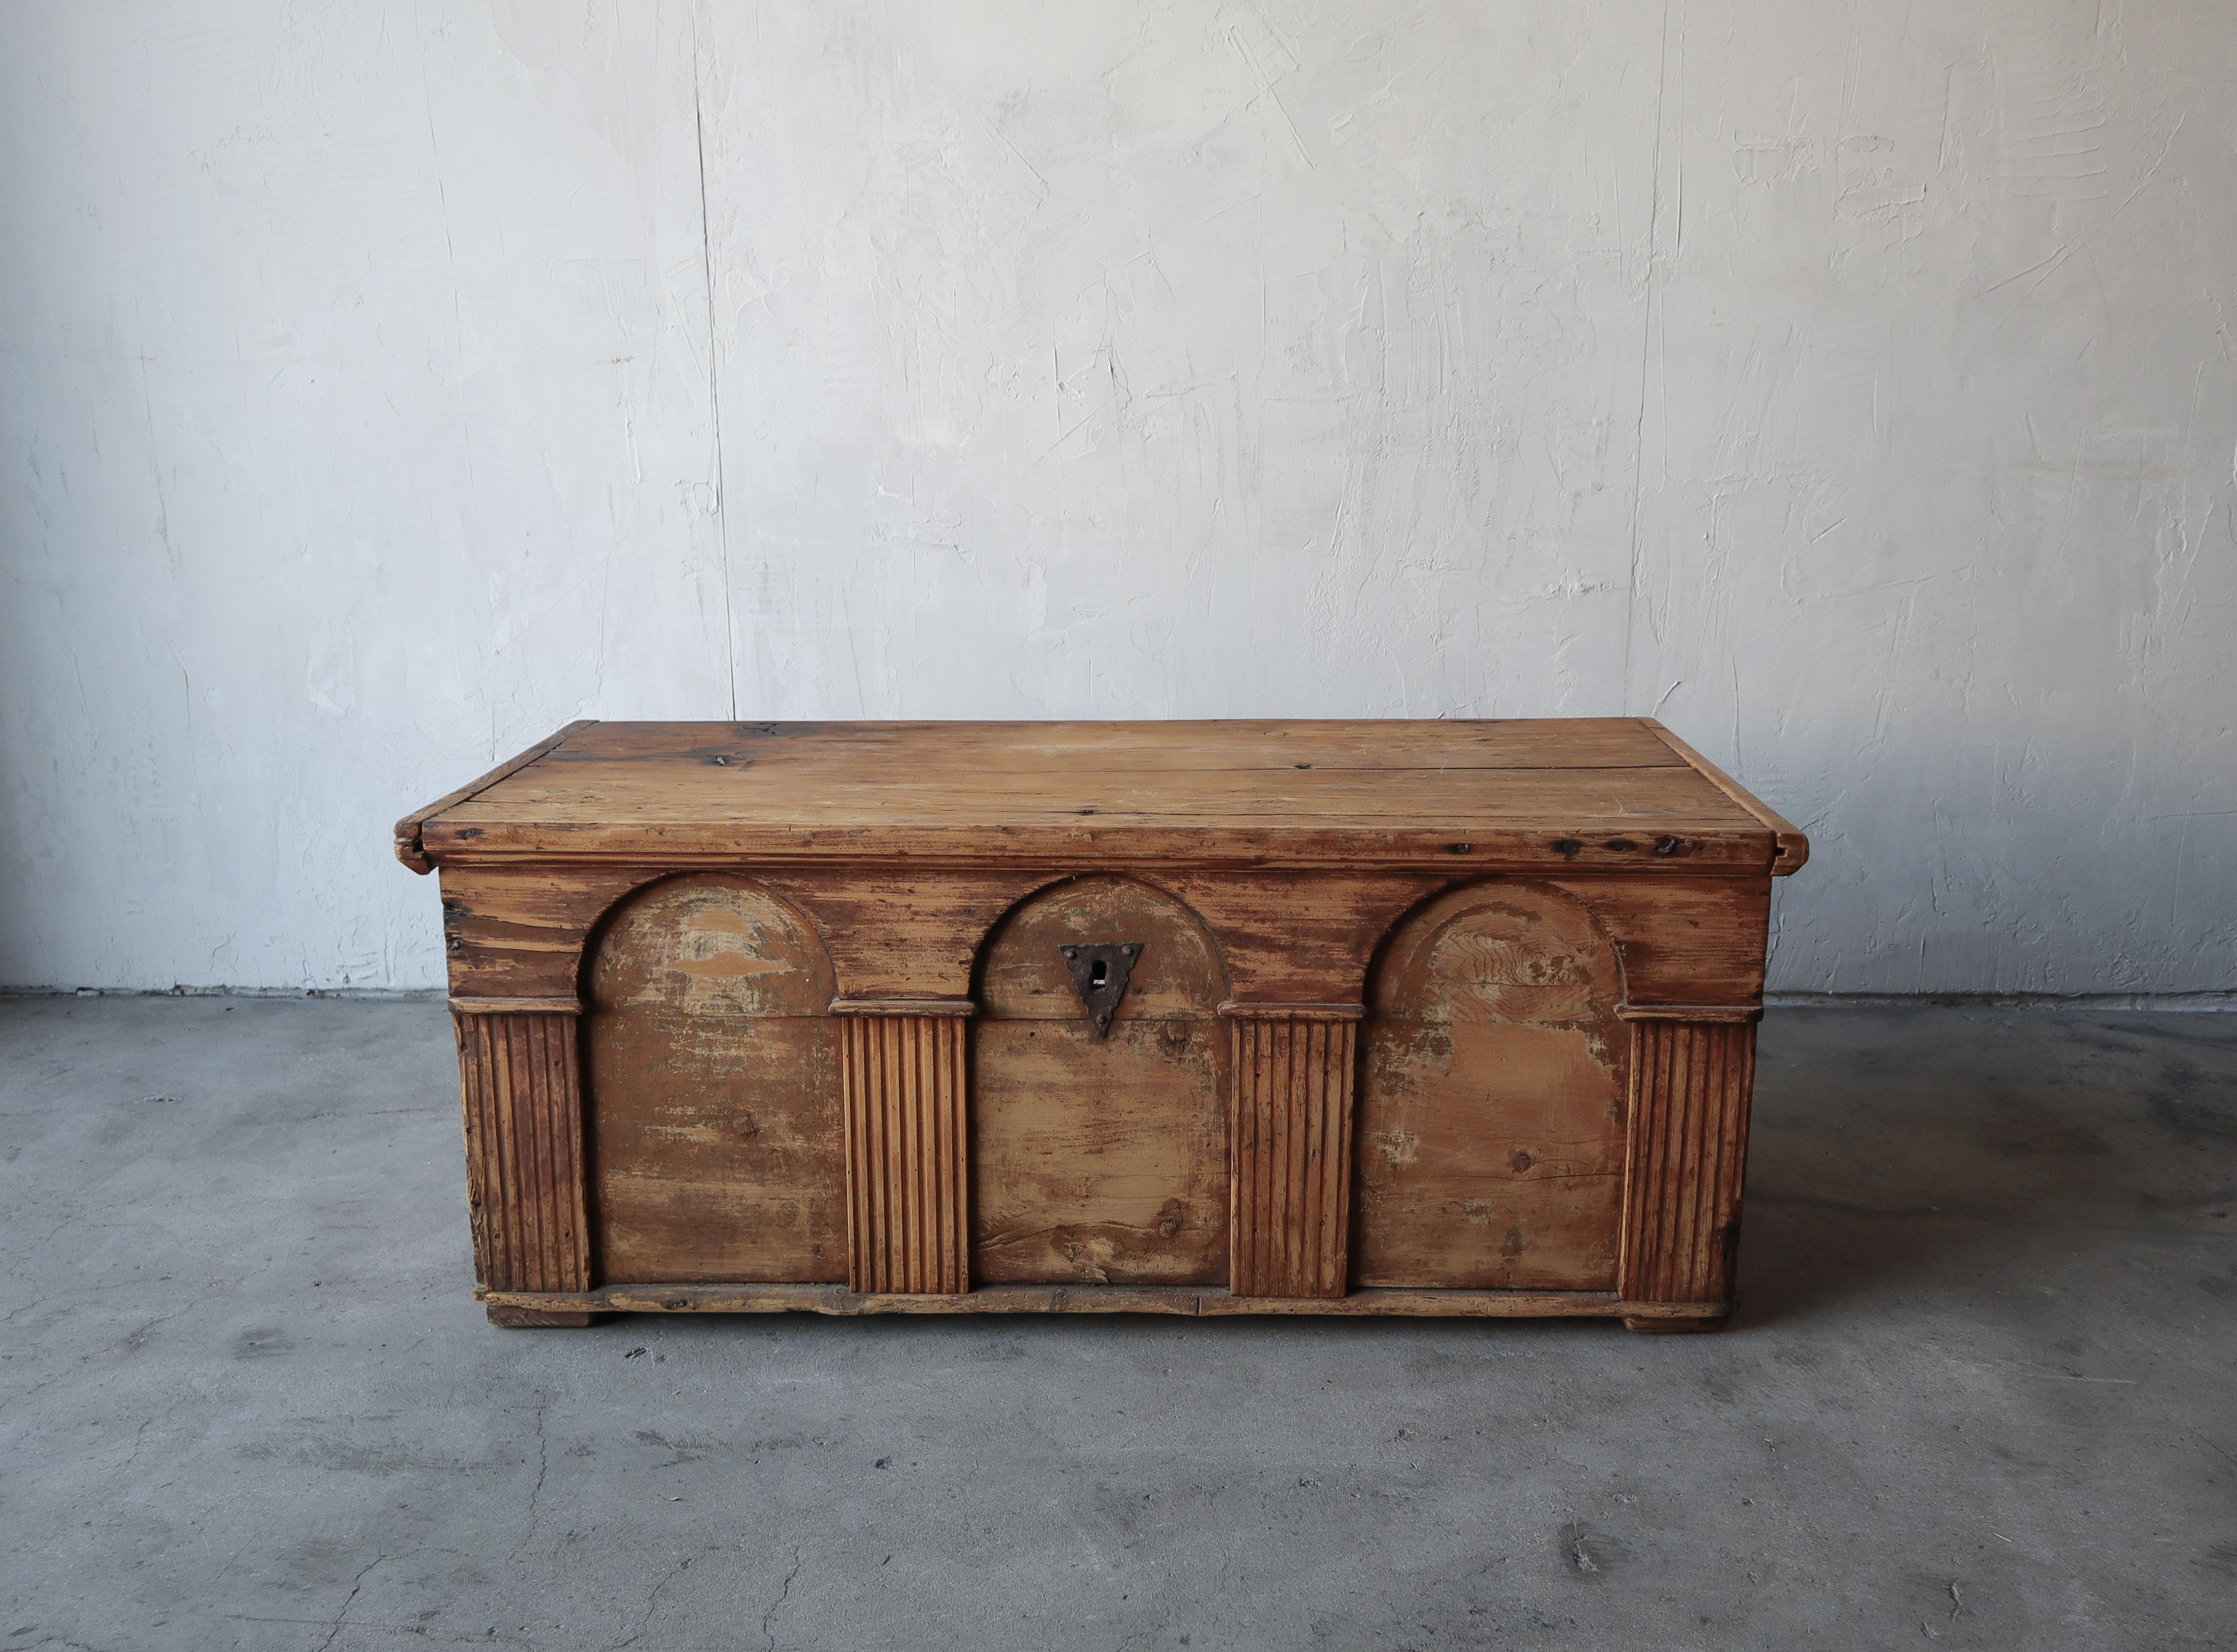 If wabisabi is your decor style, this trunk is the epitome. This piece is the most gorgeous antique decor accent piece.

Trunk is in overall great shape for its age. Some of the wood has split due to age and the hardware is rusty but it doesn't